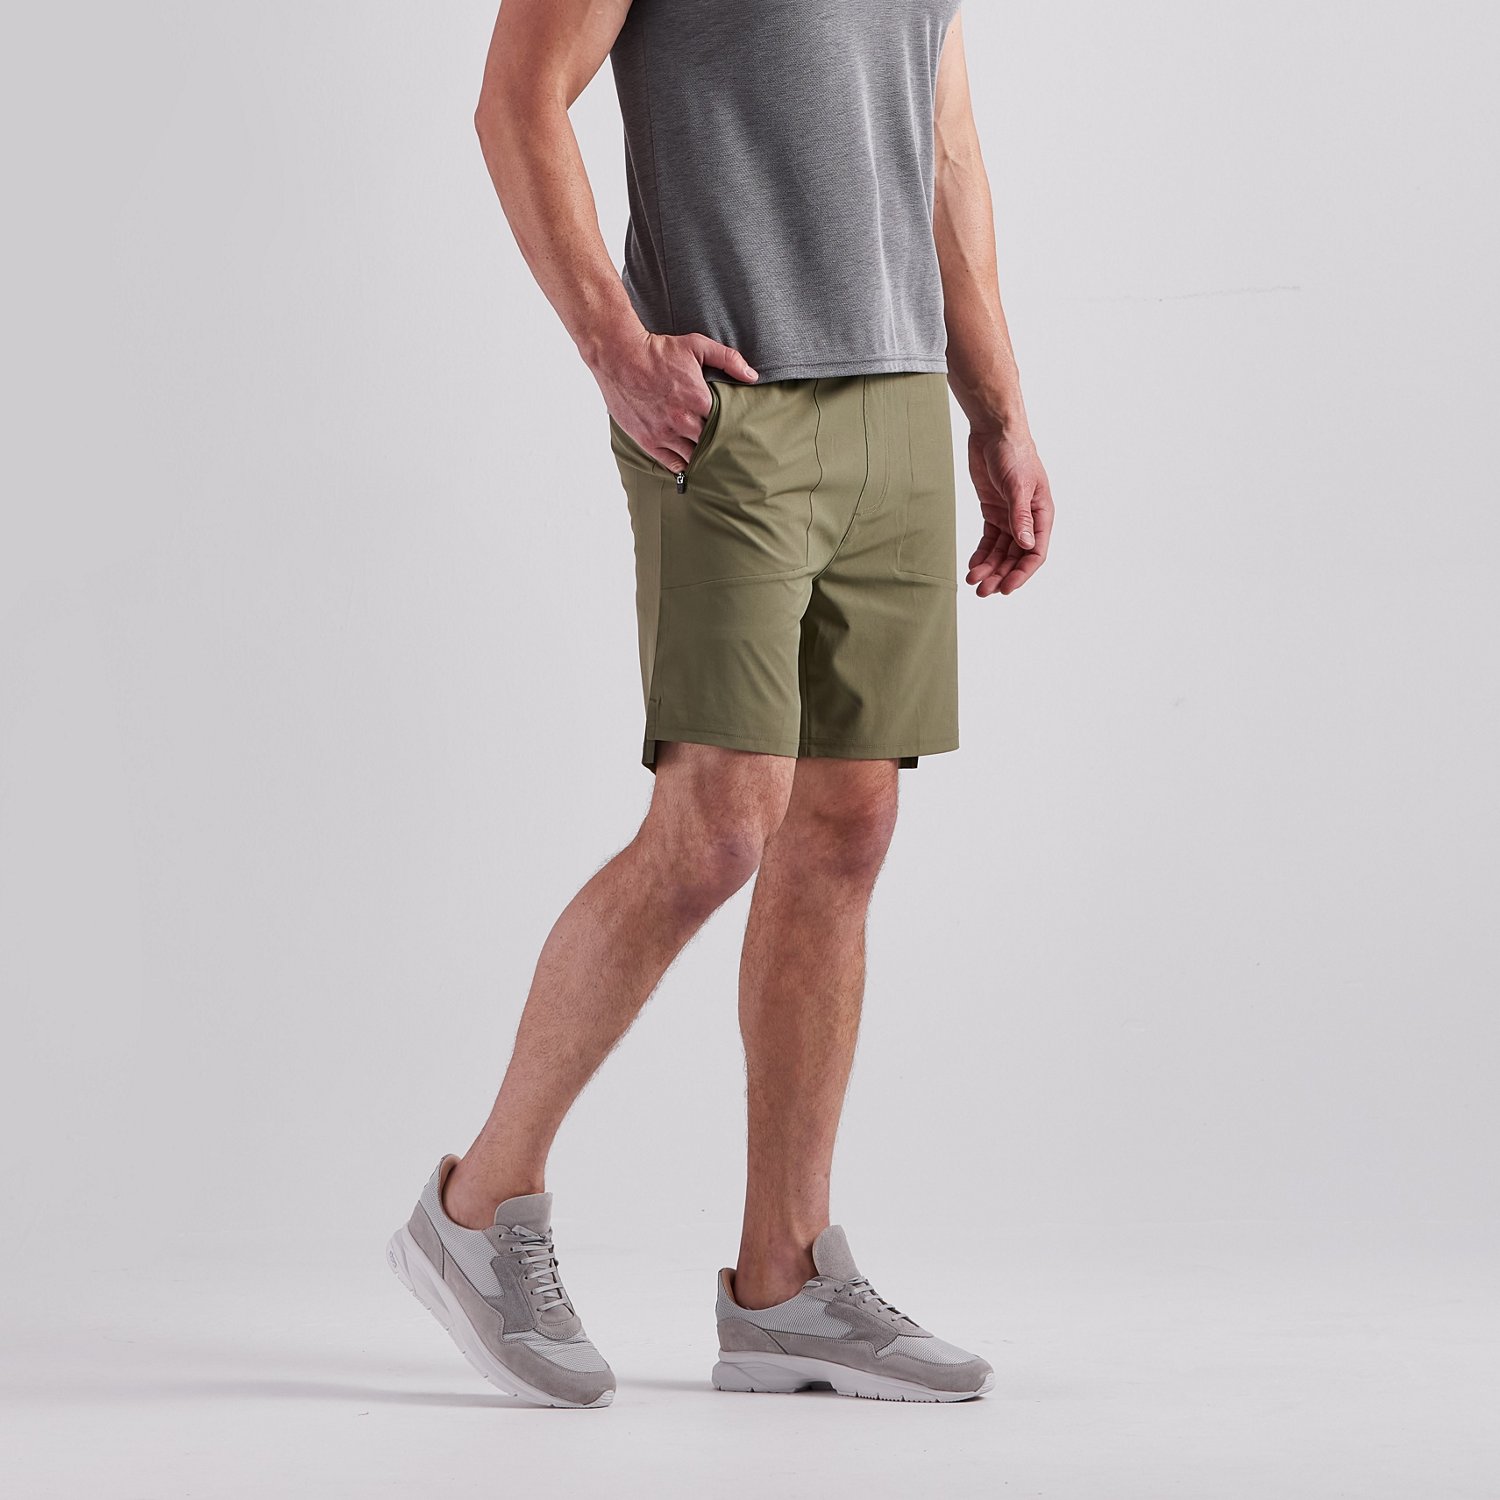 Guaranteed | 2-in-1 Men\'s Match Price Shorts